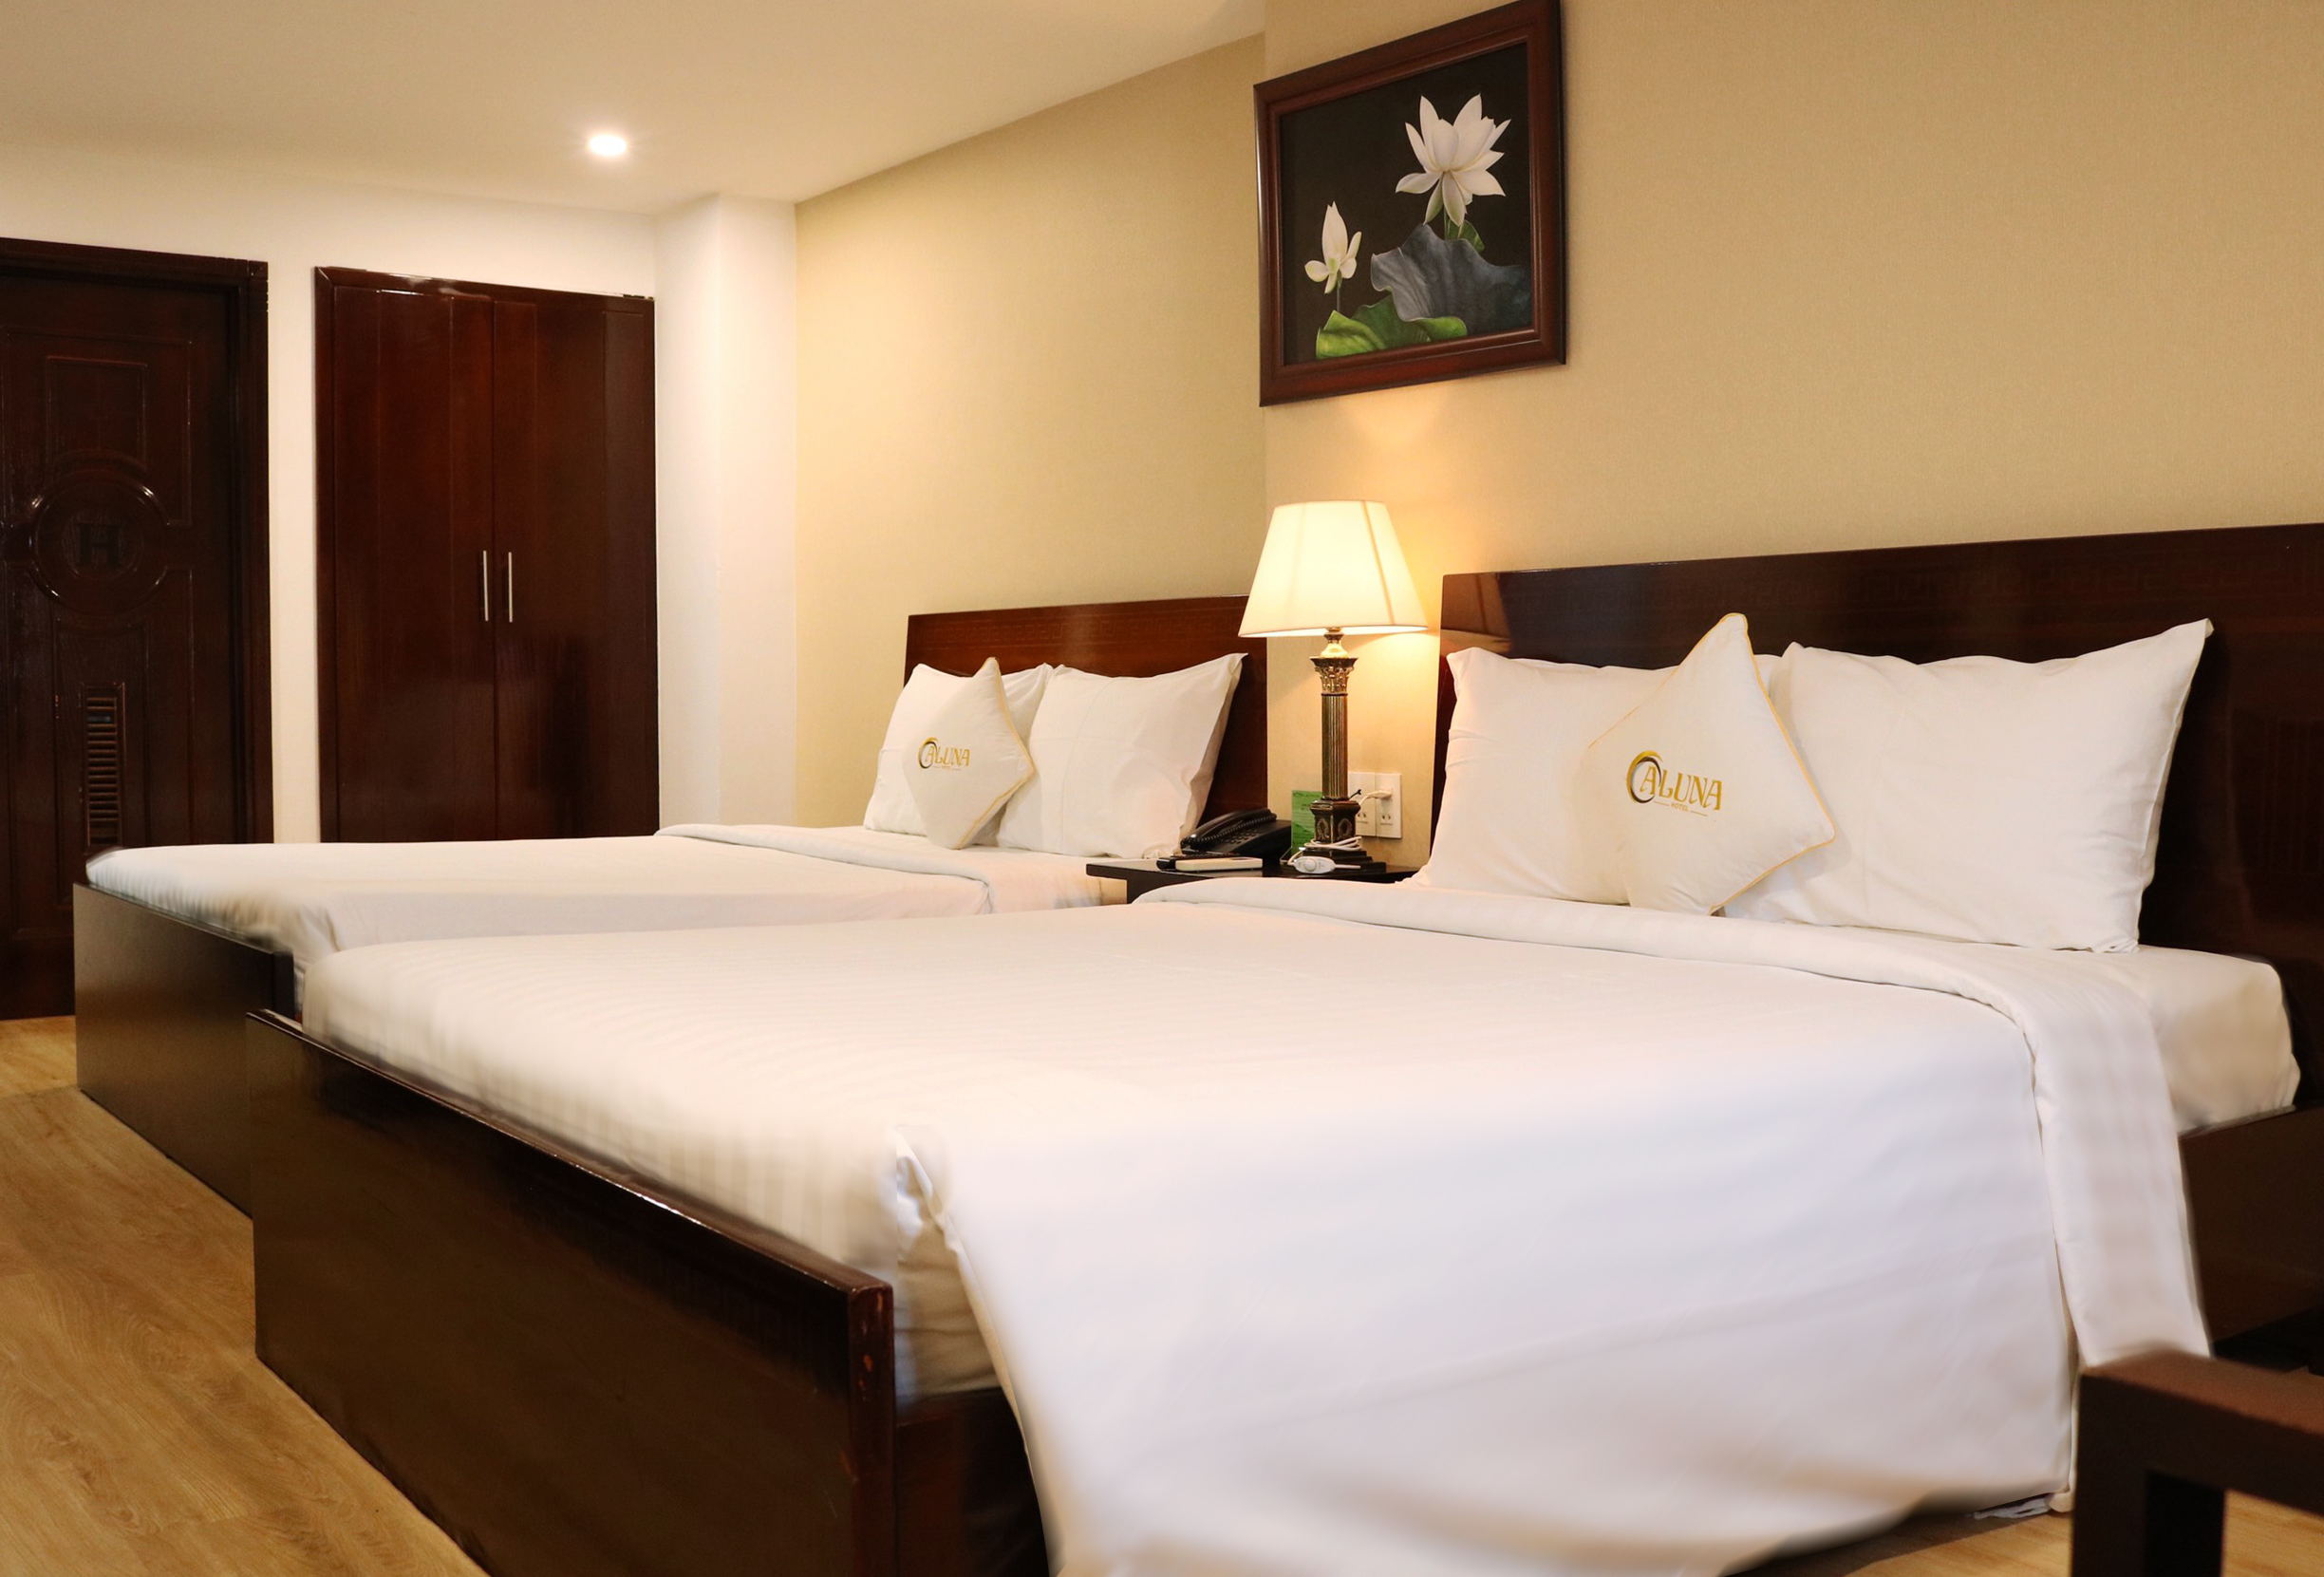 Family (2 Double Beds - 4 Pax)